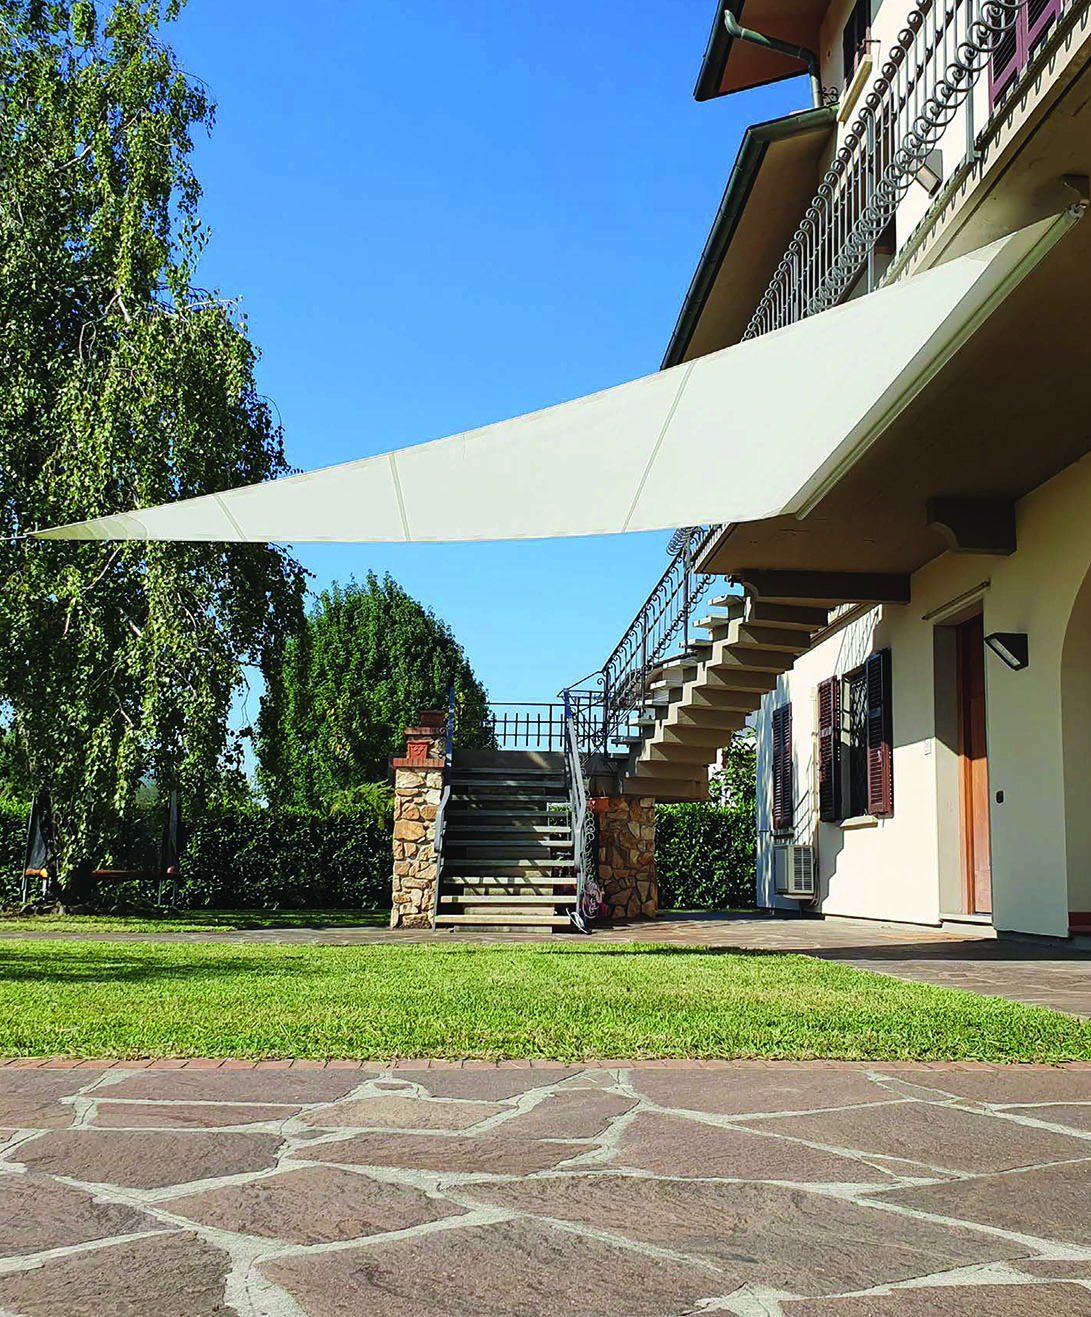 Velart Sail Shade attached to the underside of a deck and overhanging a grassy area